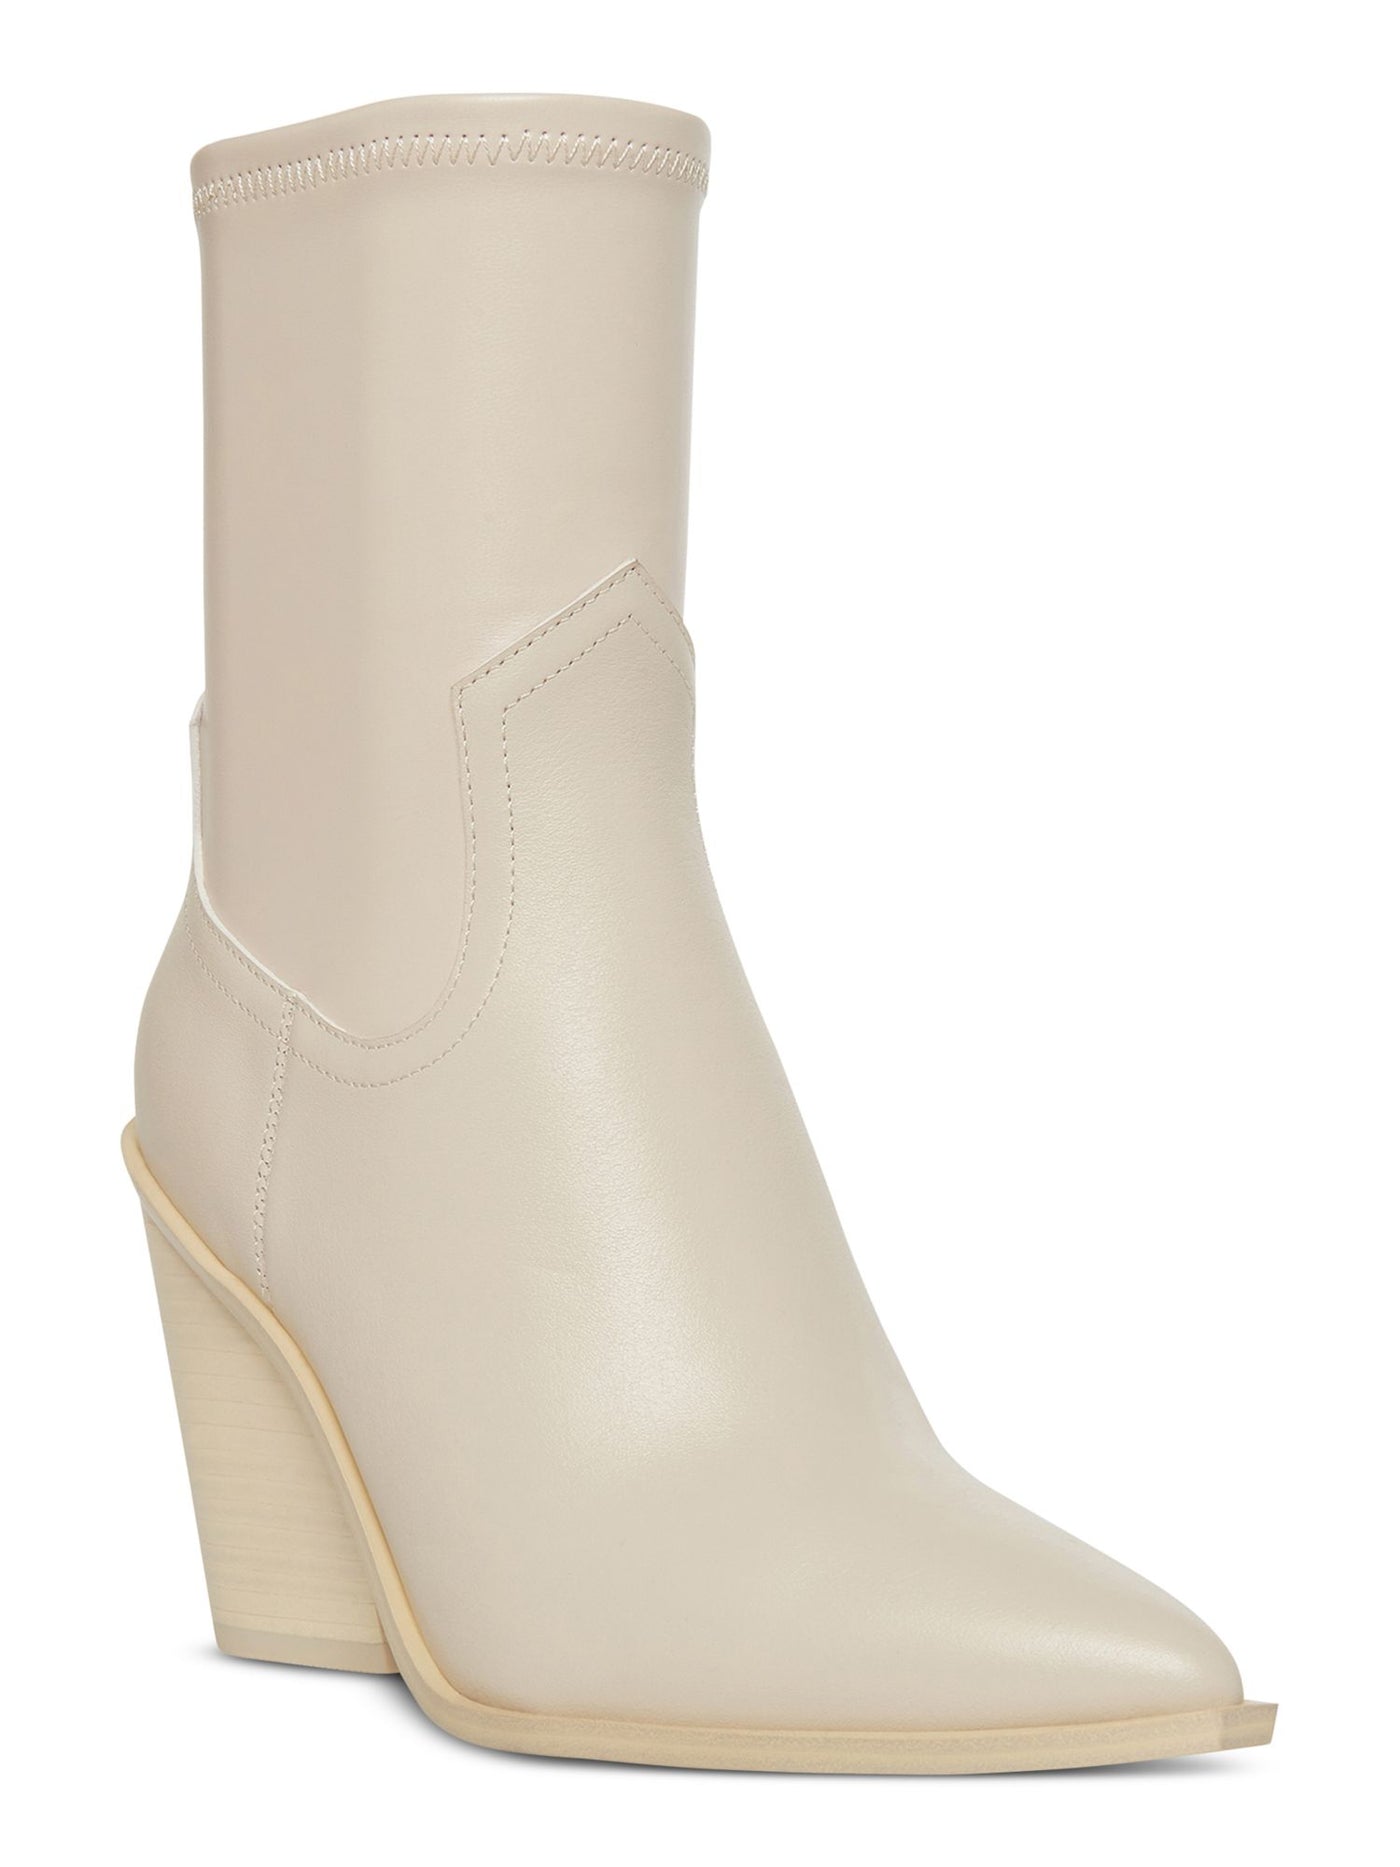 STEVE MADDEN Womens Ivory Stretch Thorn Pointed Toe Block Heel Zip-Up Leather Western Boot 8 M